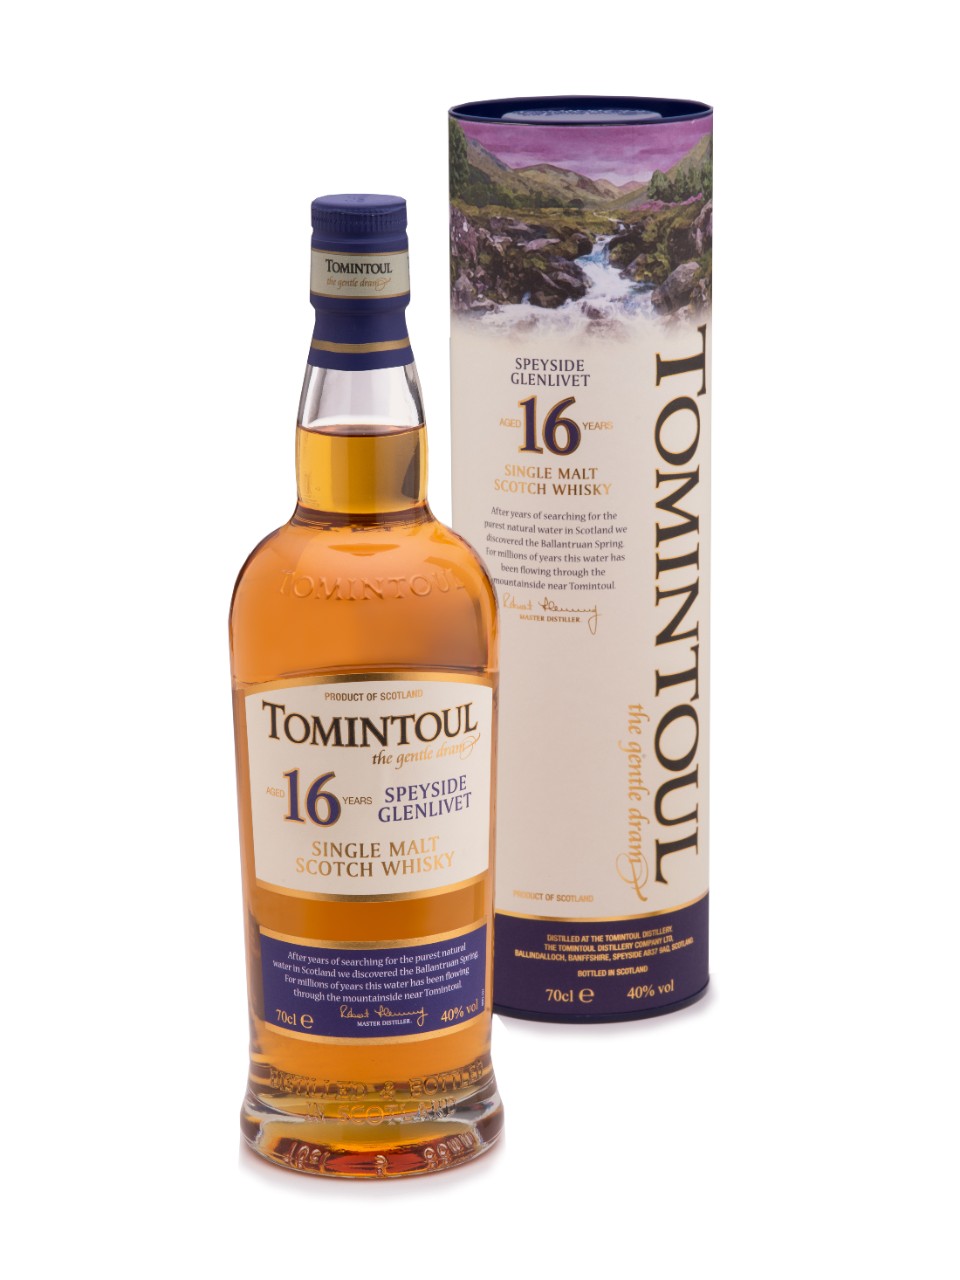 Welcome back Tomintoul 16YO